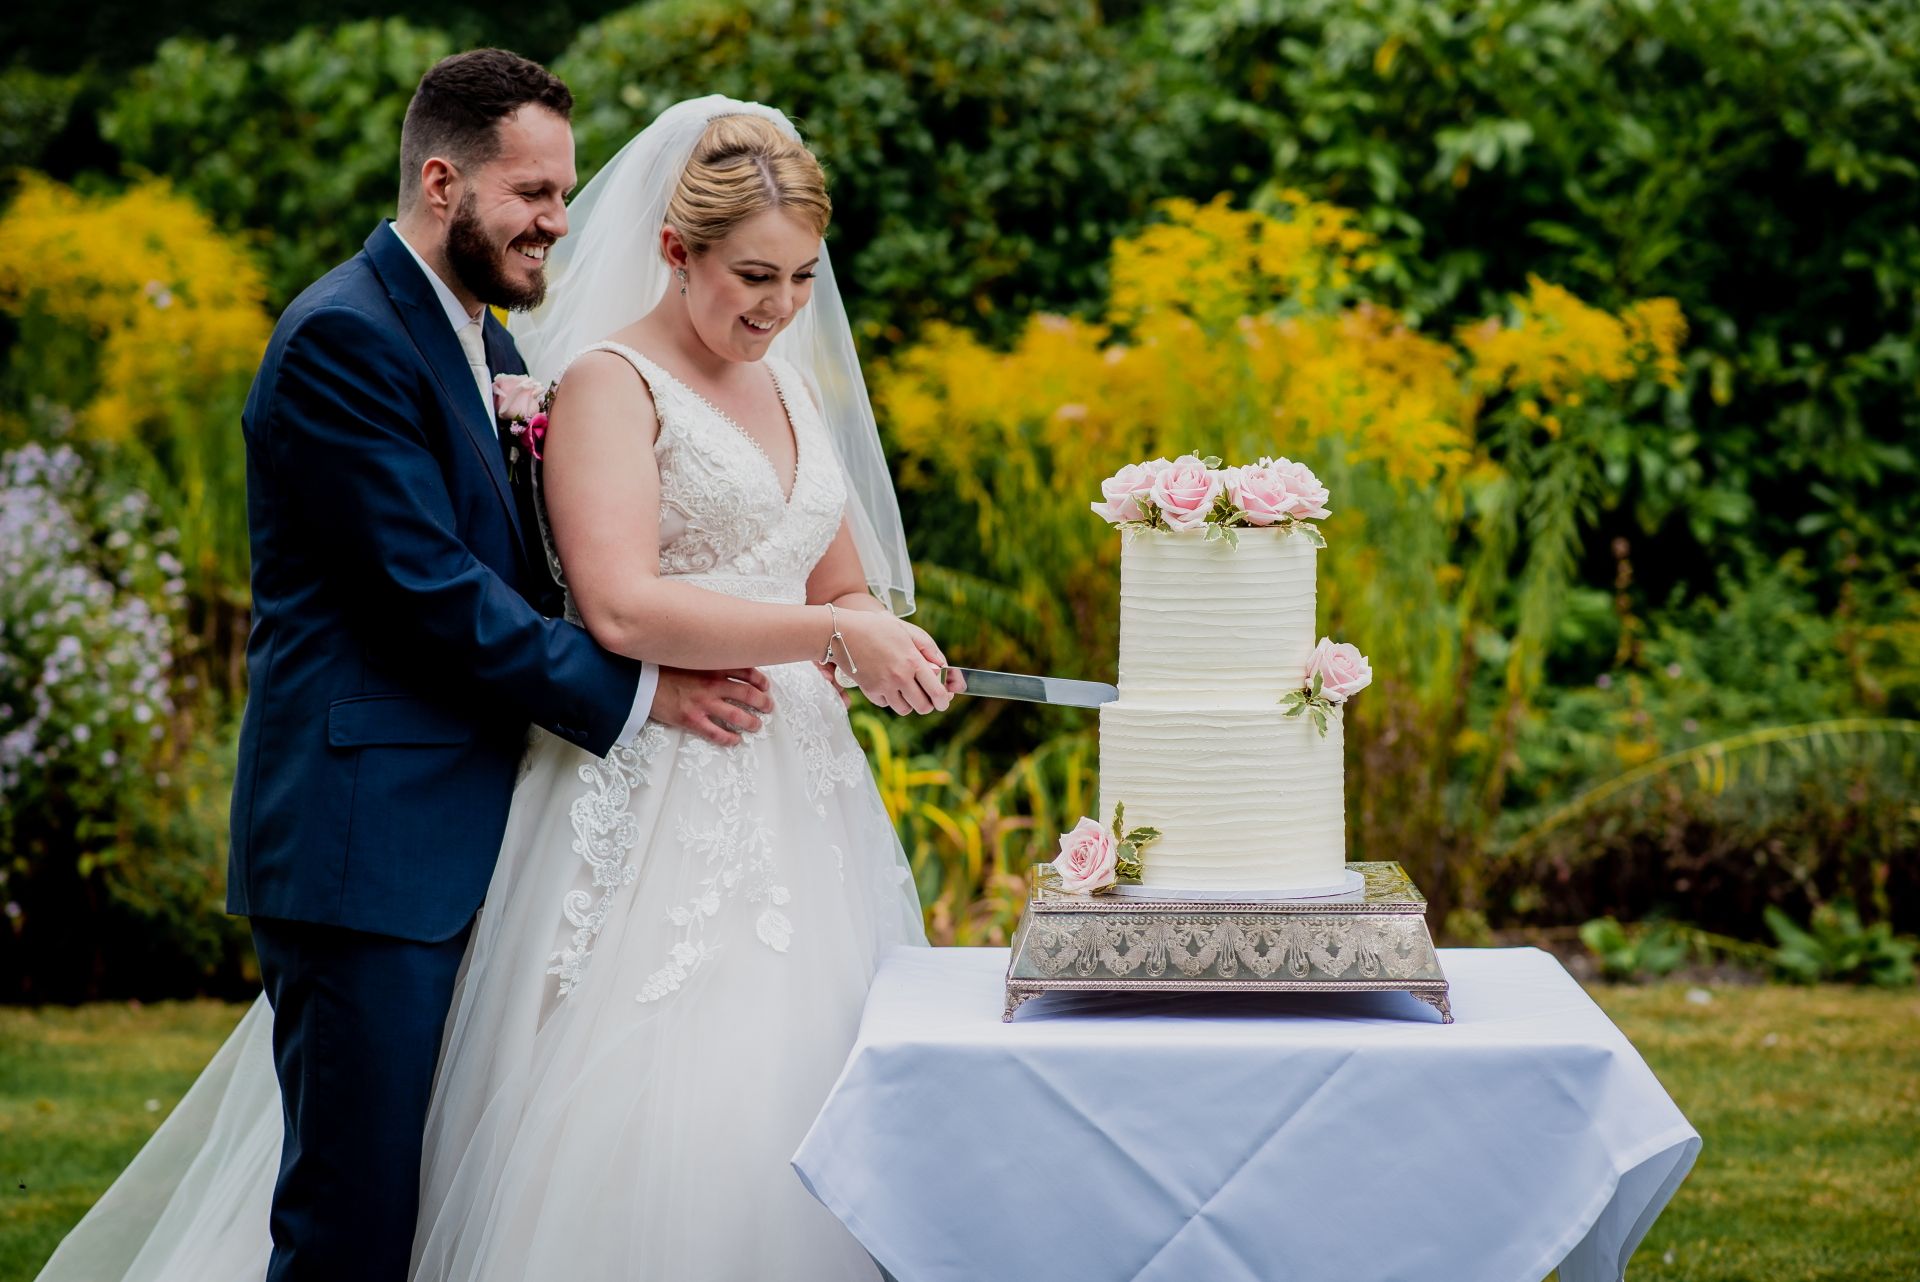 Leah and Nic cutting their gorgeous two tier wedding cake with pink flowers by Daisy Cakes. Photo thanks to Damien Vickers Photography. 